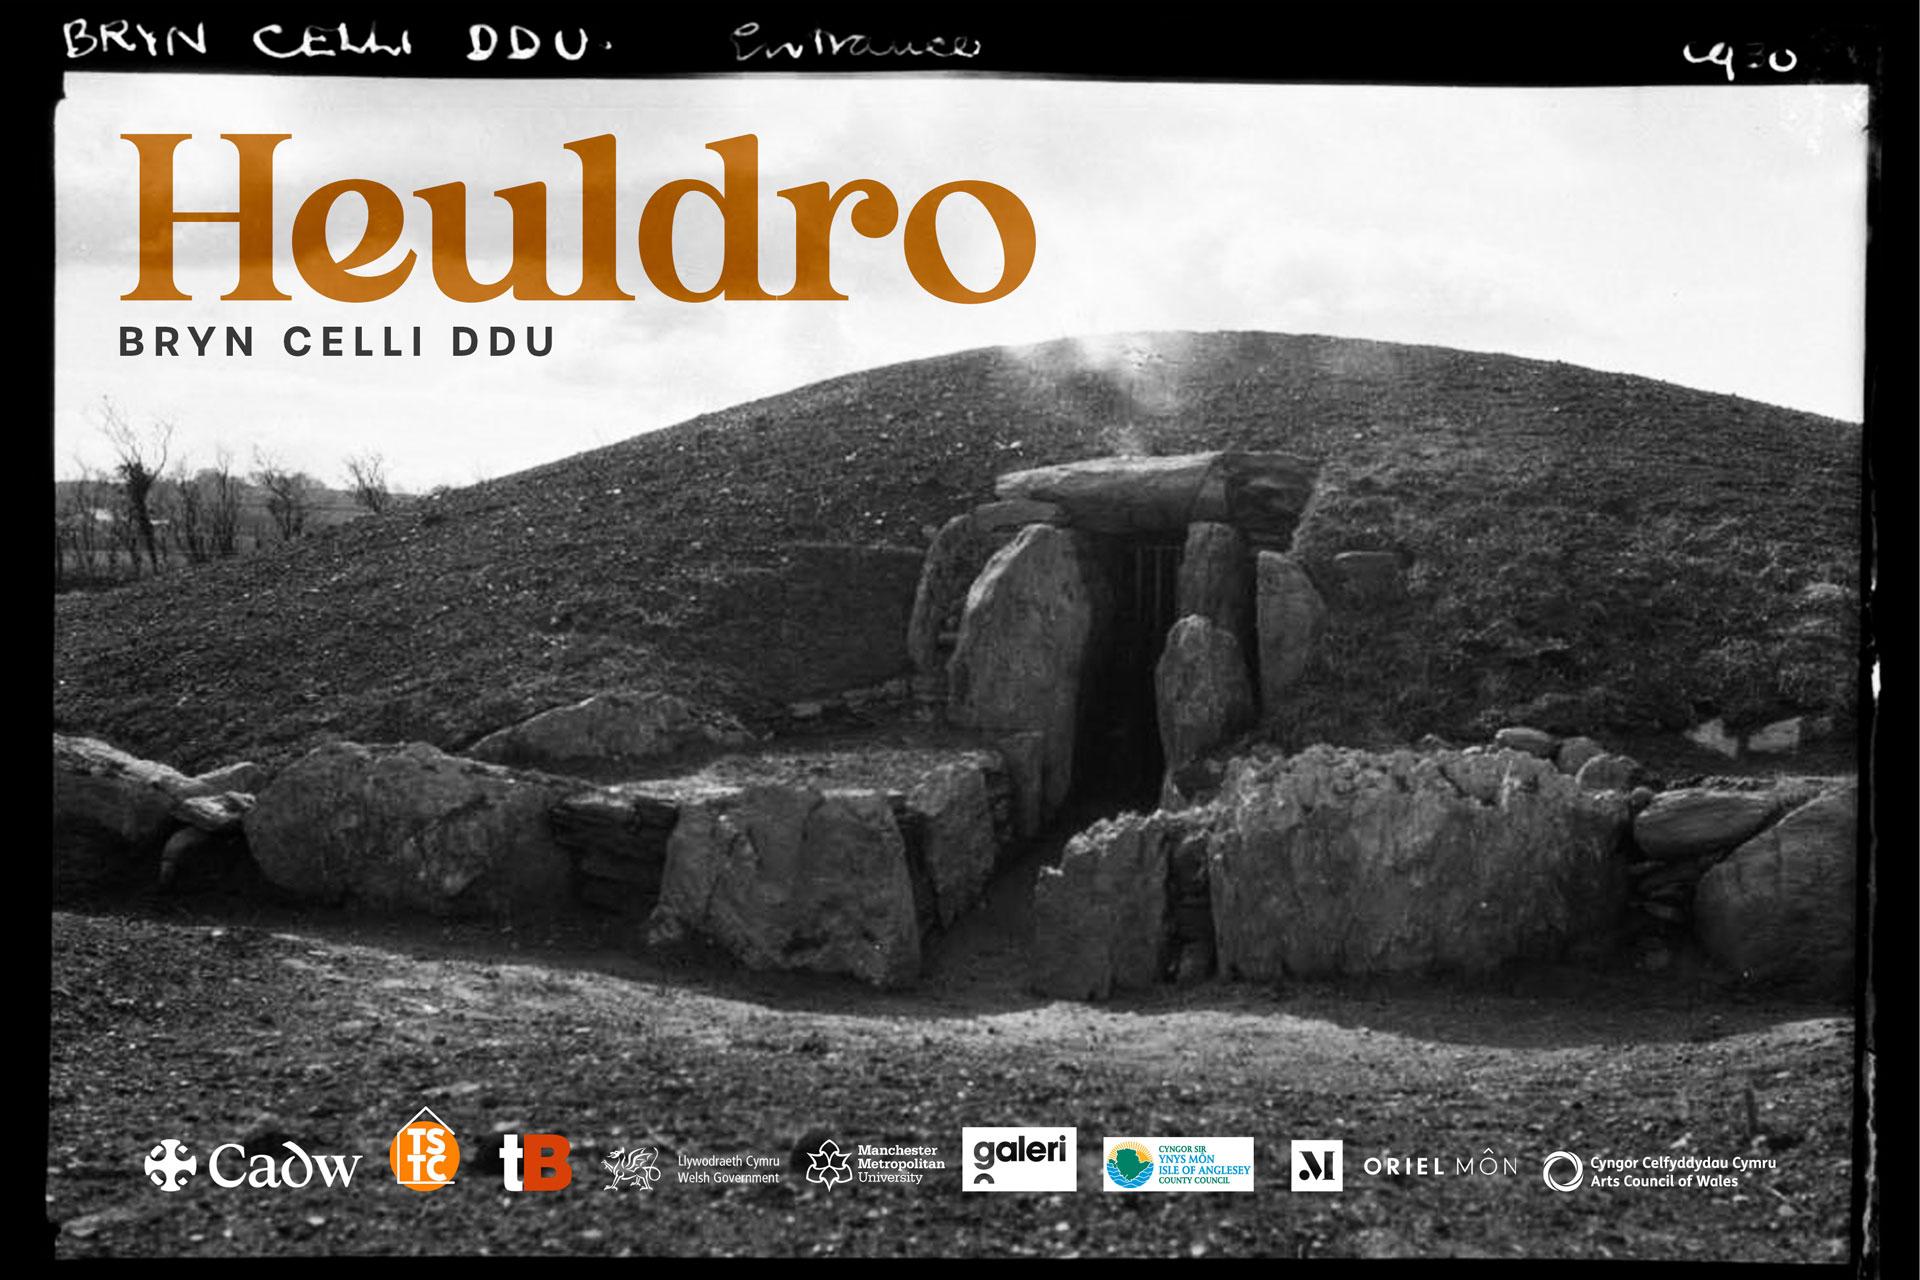 Poster art and black and white photography of Bryn Celli Ddu